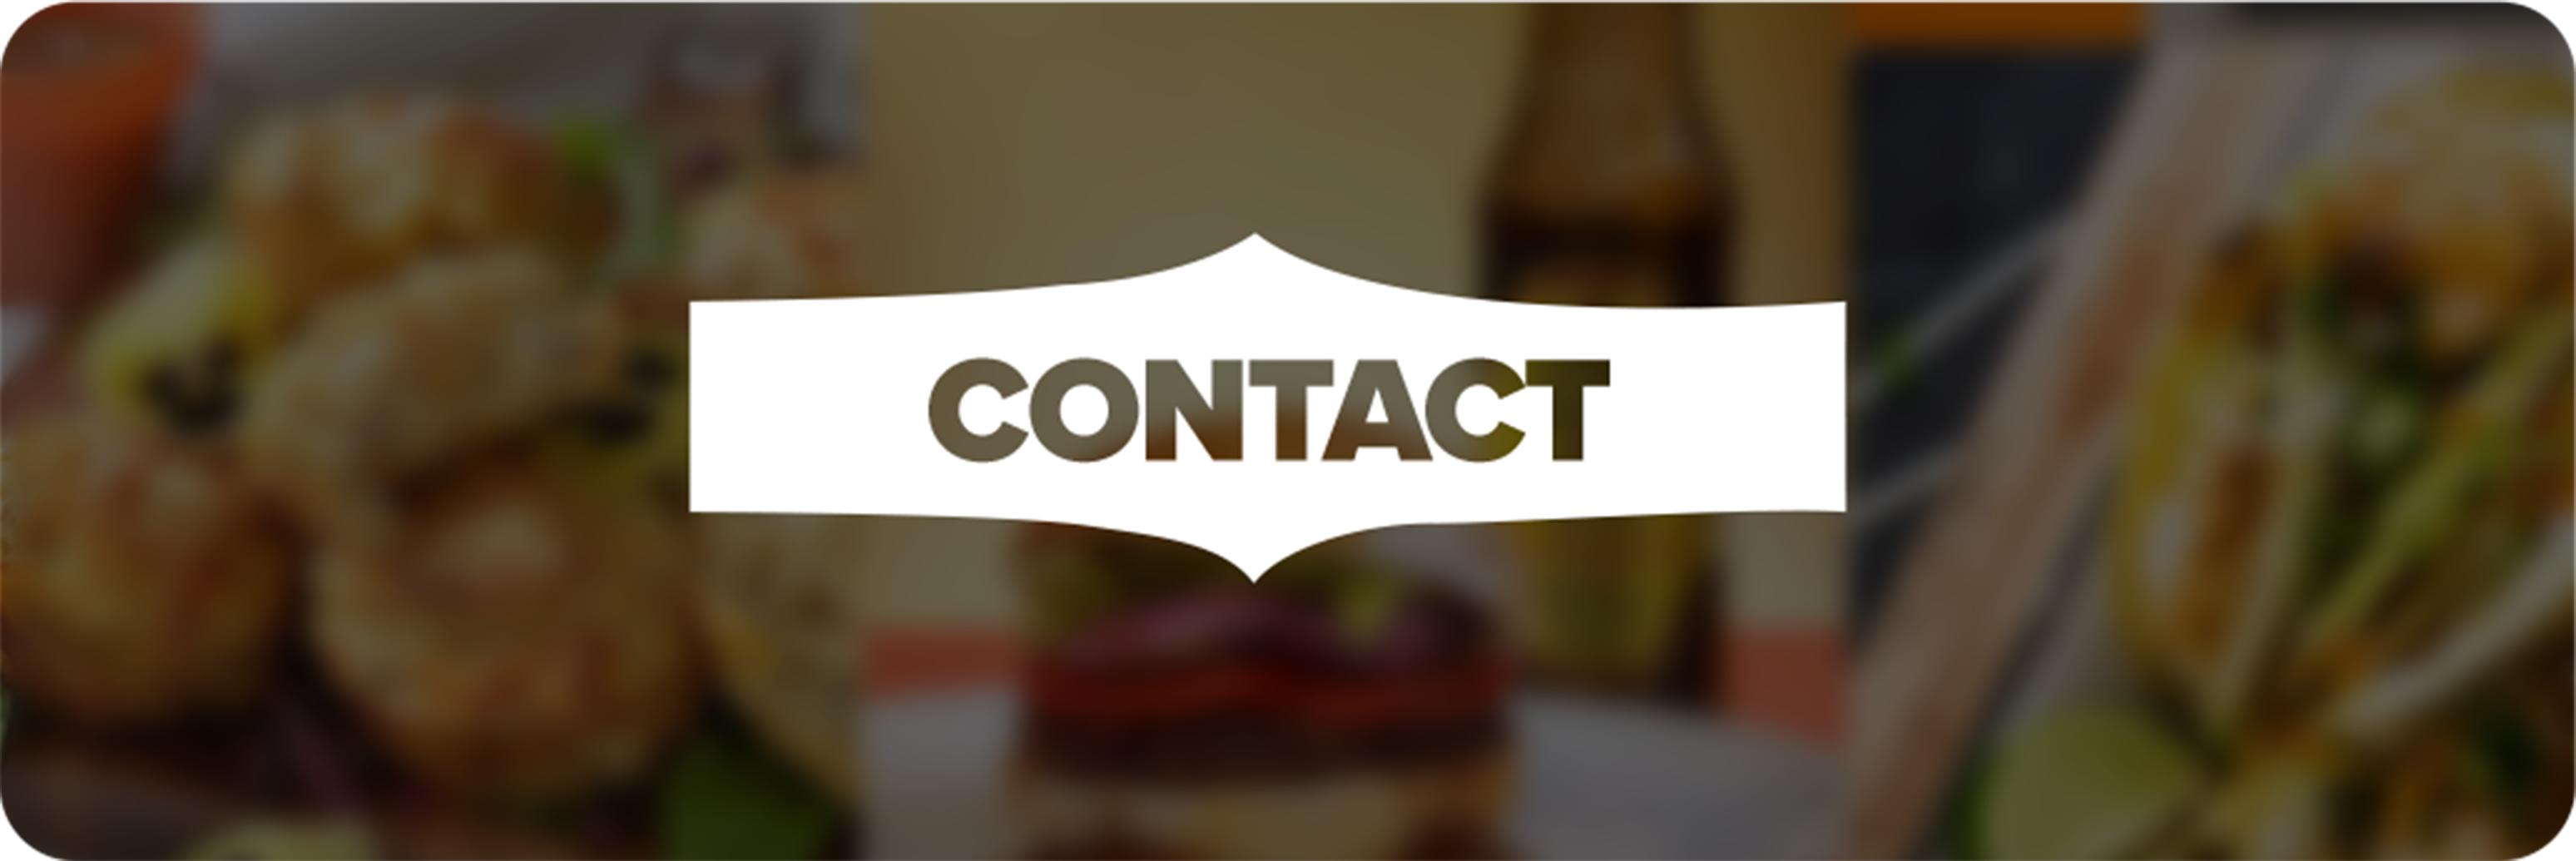 Contact-Banner